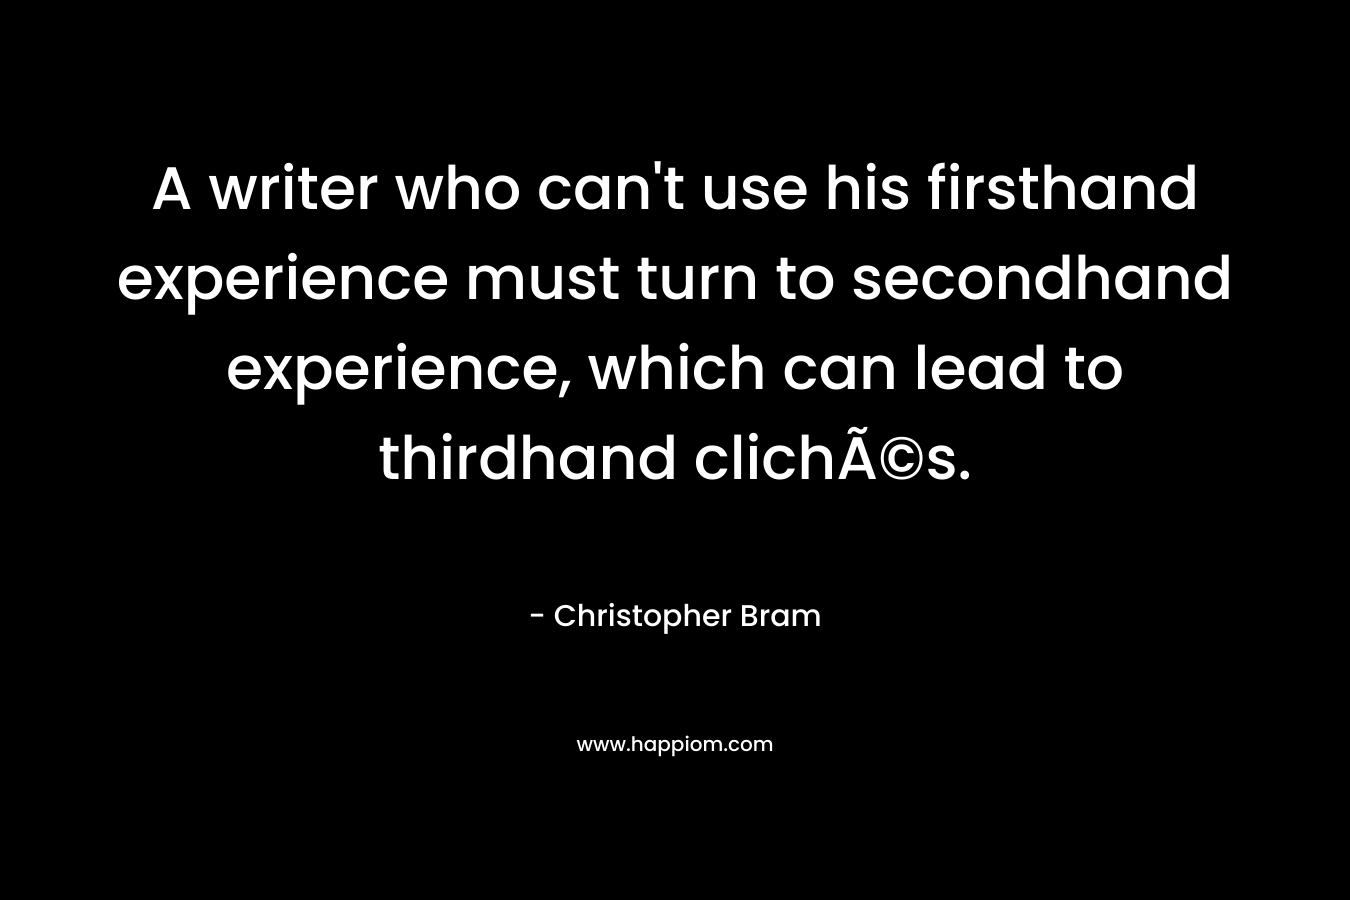 A writer who can’t use his firsthand experience must turn to secondhand experience, which can lead to thirdhand clichÃ©s. – Christopher Bram